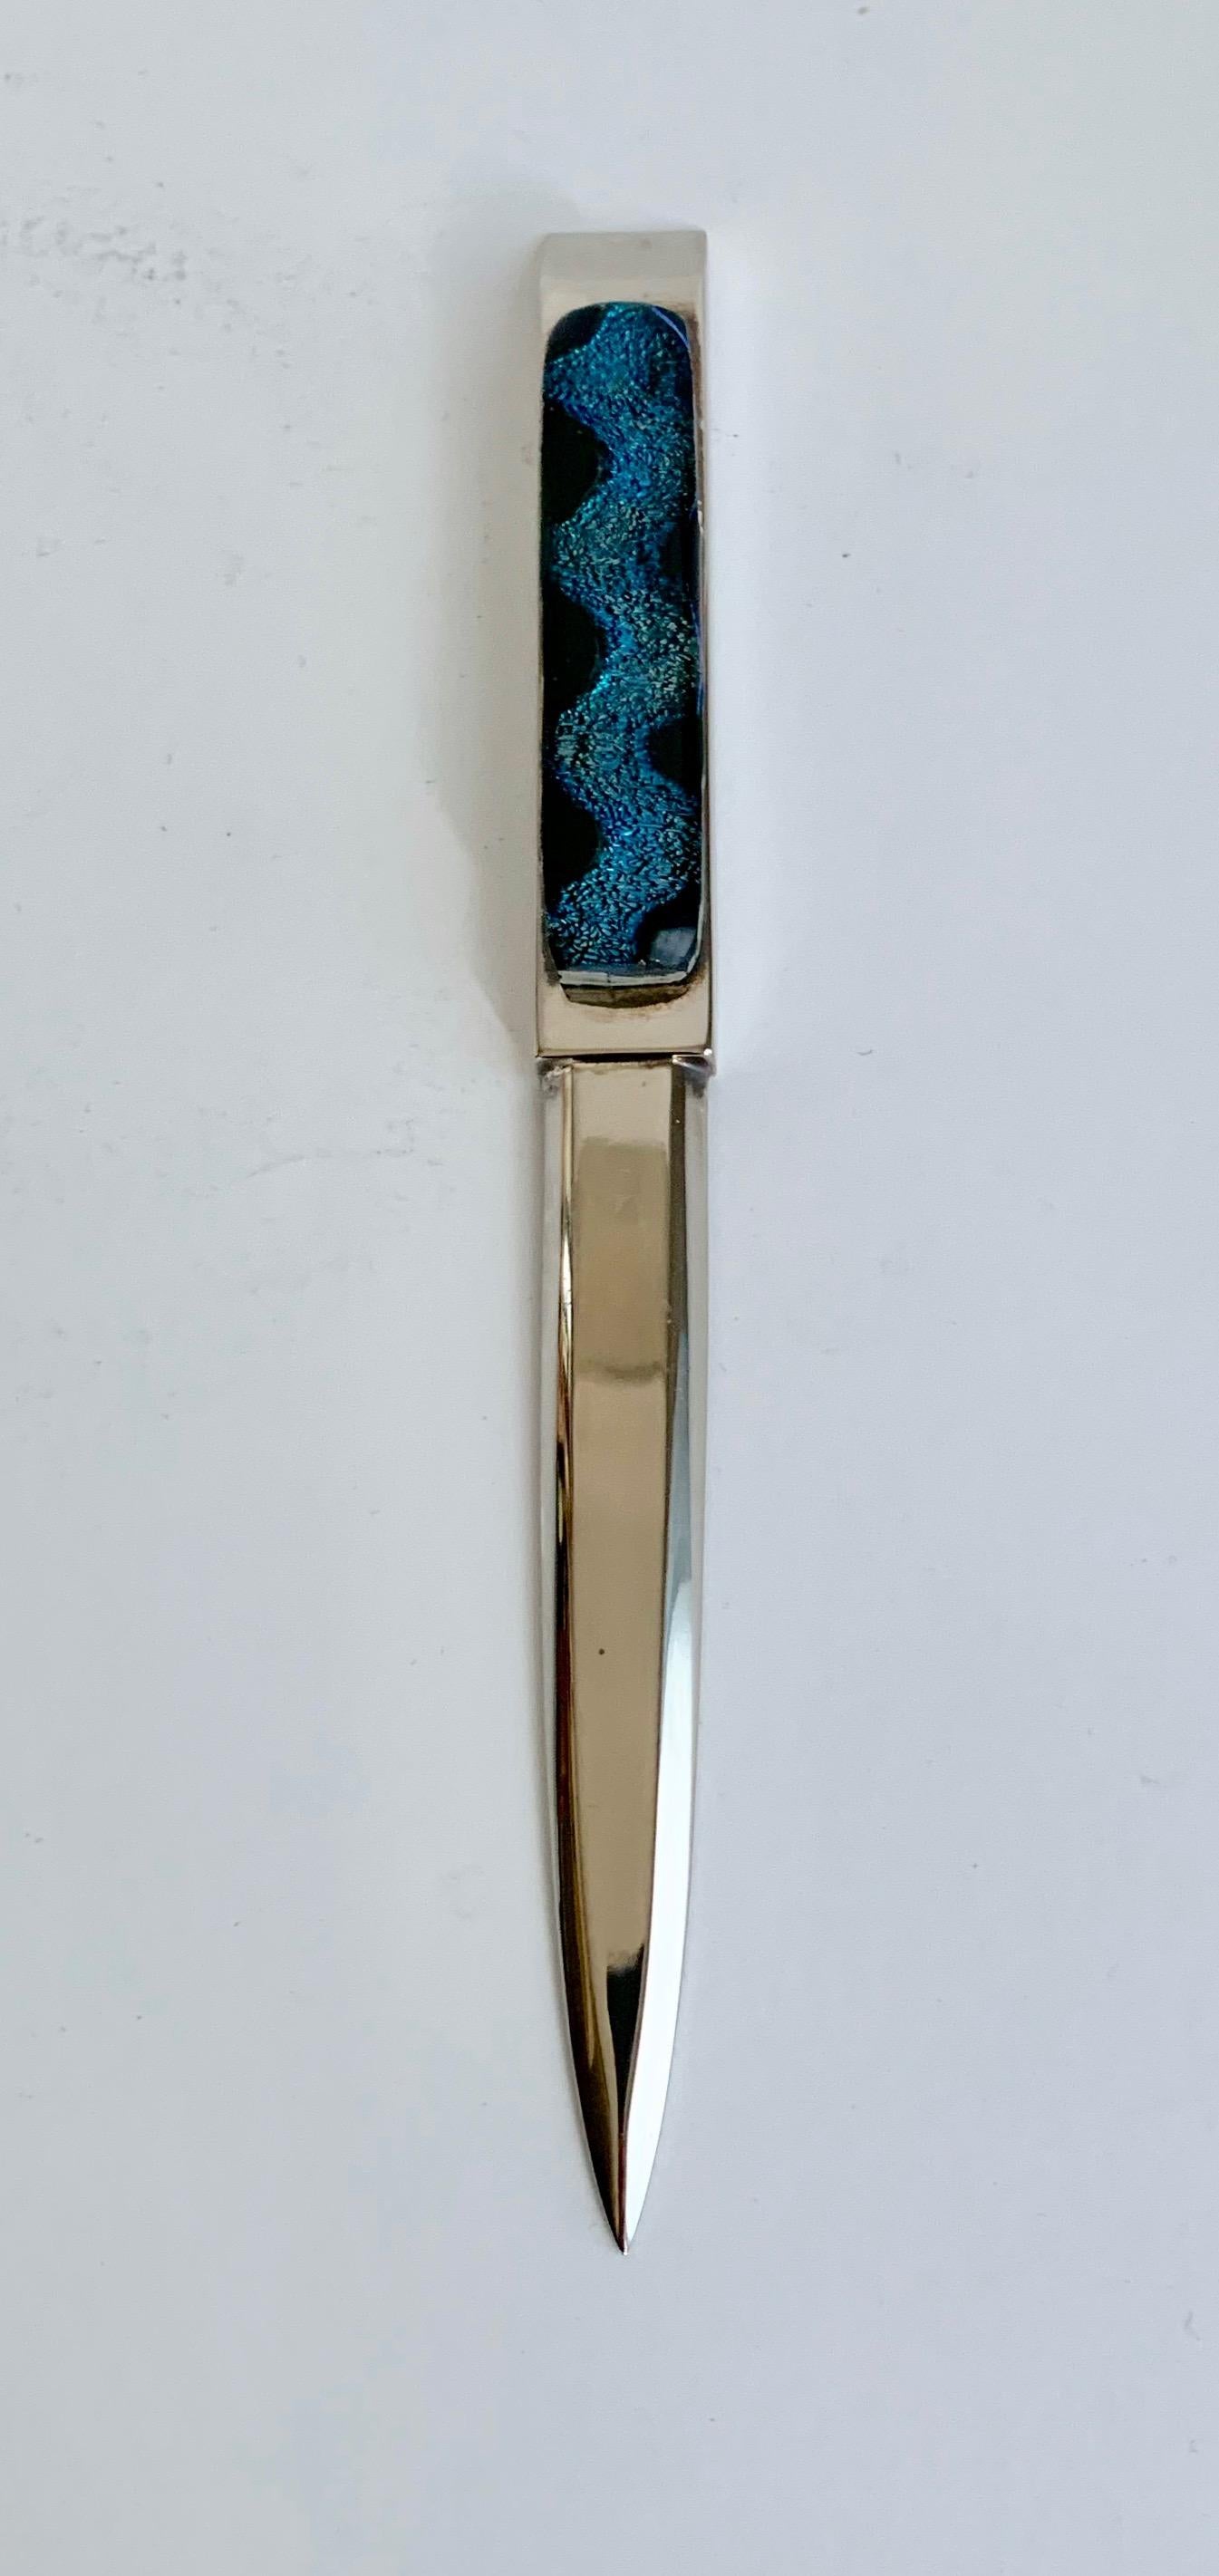 A handsome letter opener with blue glass, simple and wonderful for the desk or room with blue accents... a great gift.